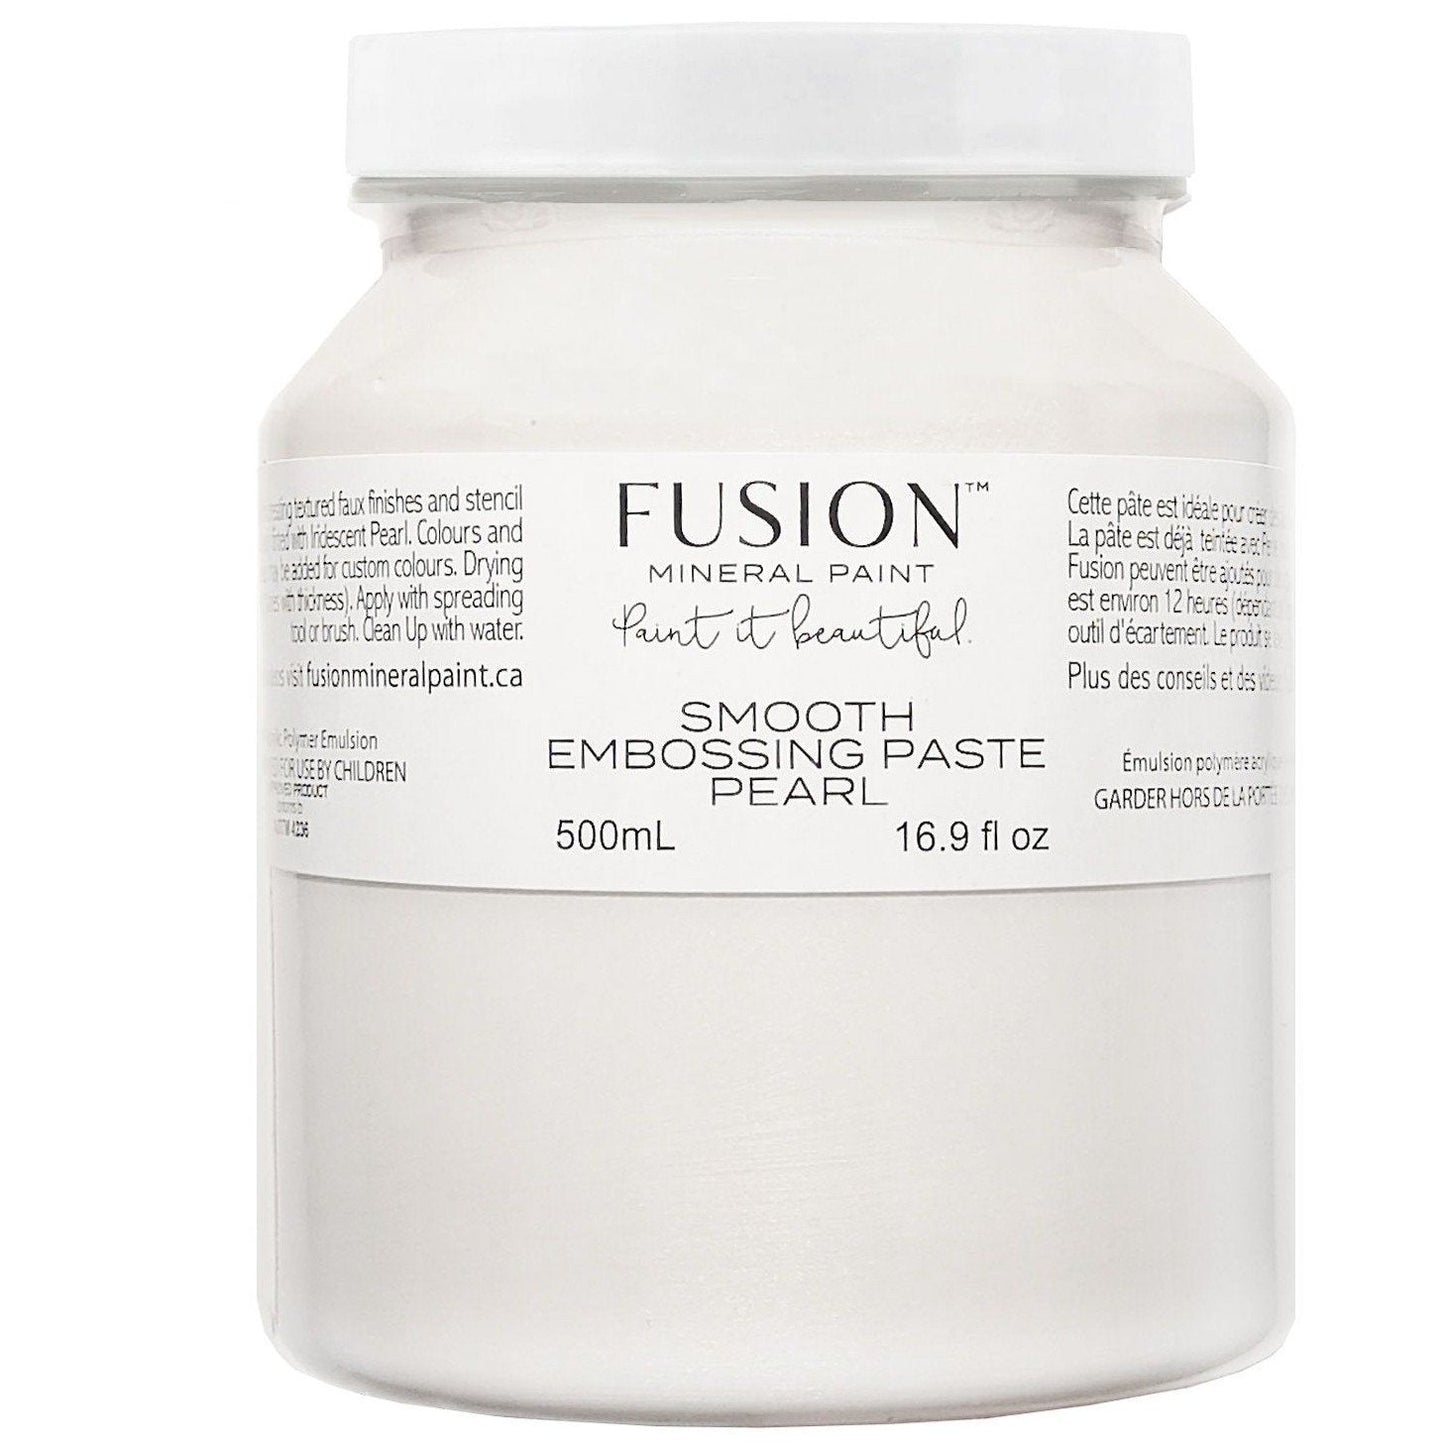 Smooth Embossing Paste in Pearl - Fusion Mineral Paint